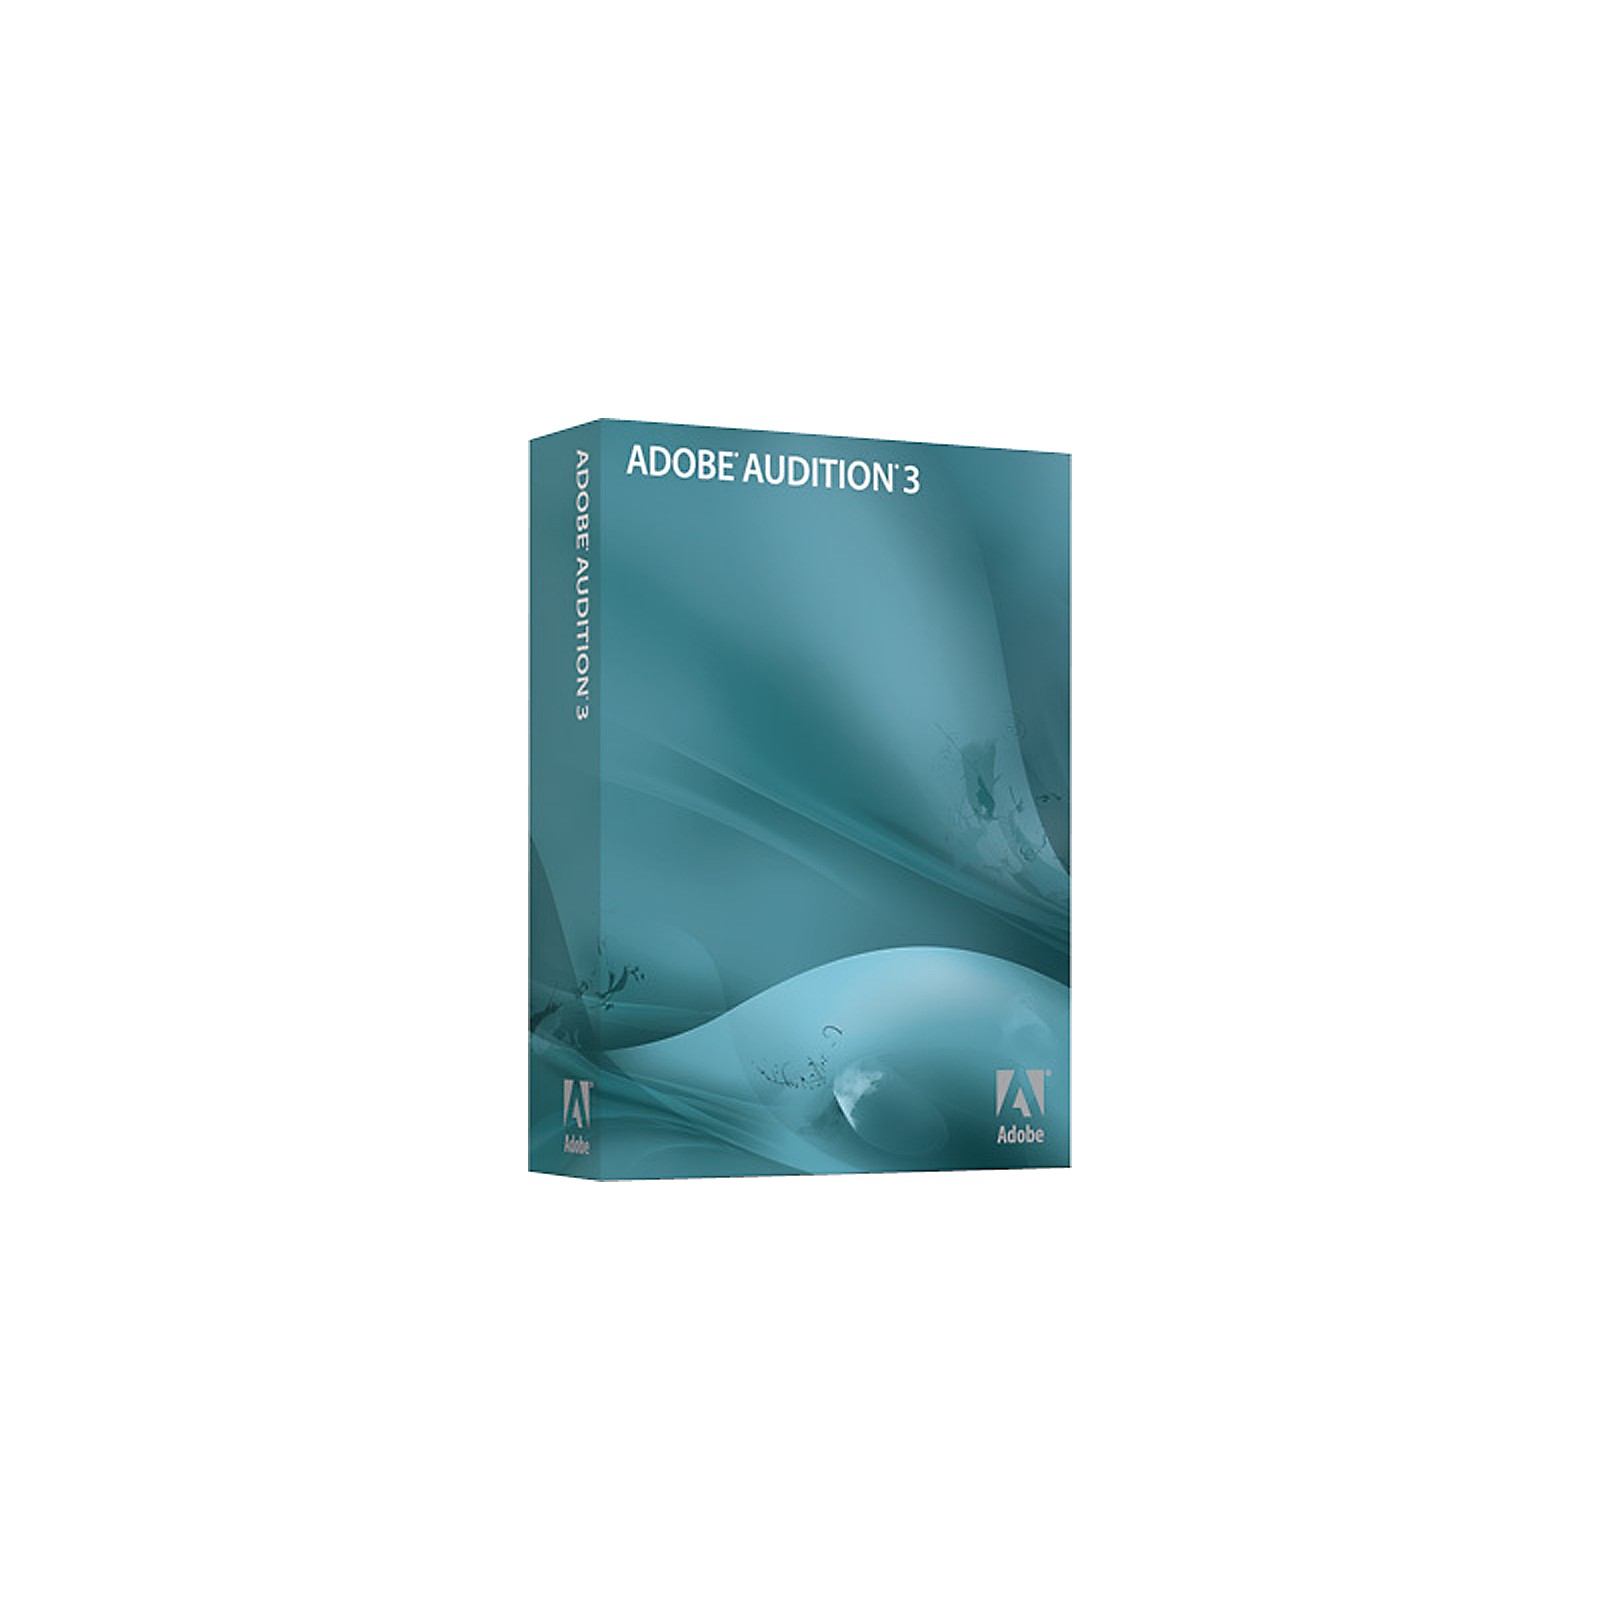 download adobe audition 3.0 full free